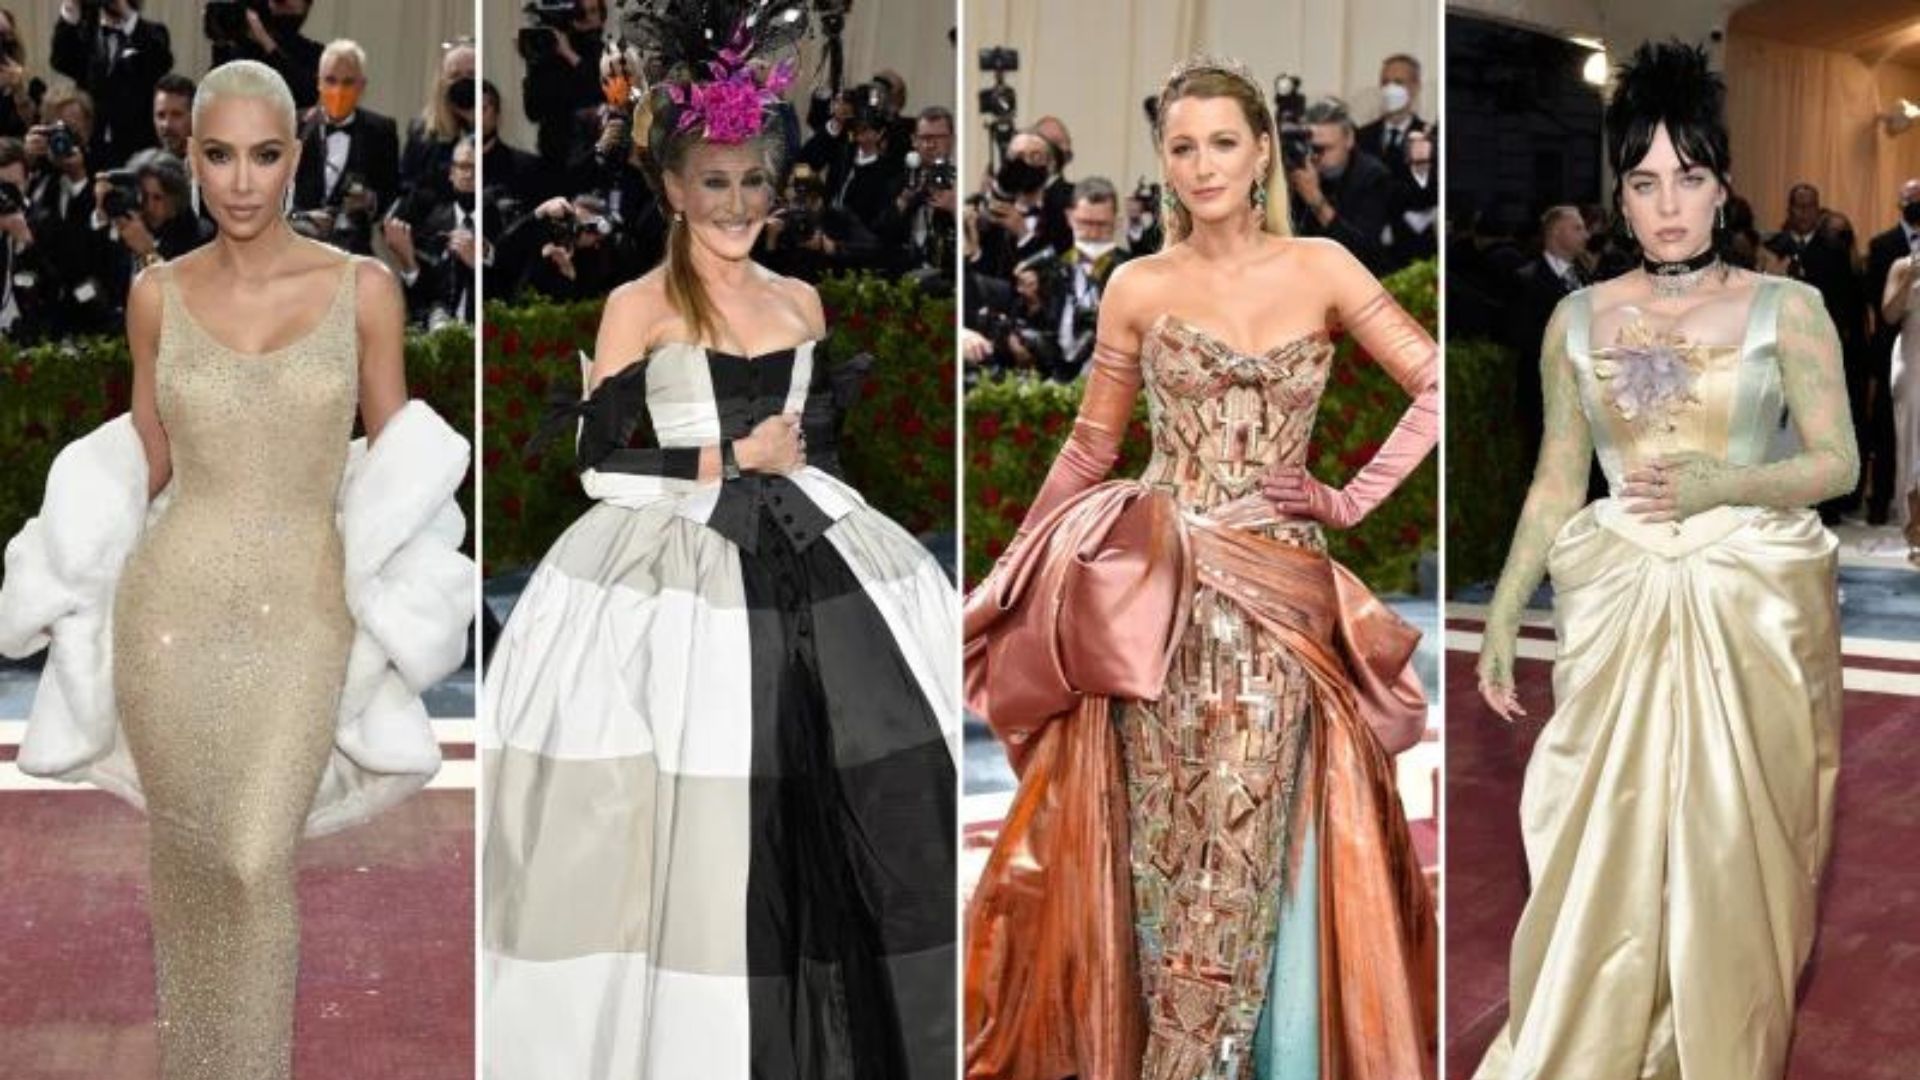 The Met Gala honorary pathway is a page-turner for some reasons